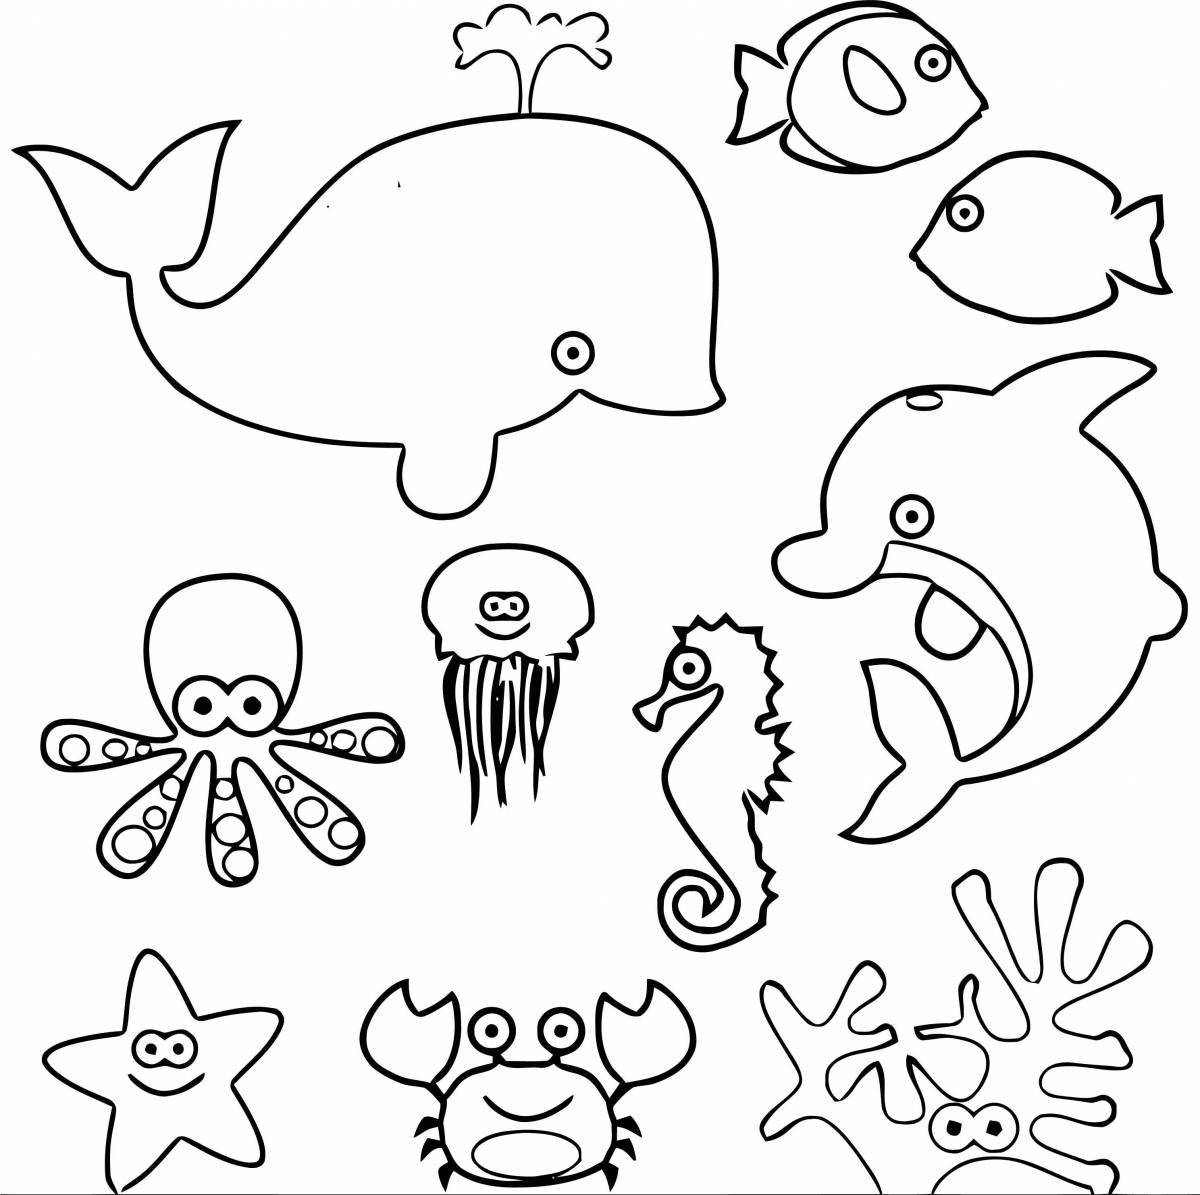 Cute marine life coloring book for 3-4 year olds